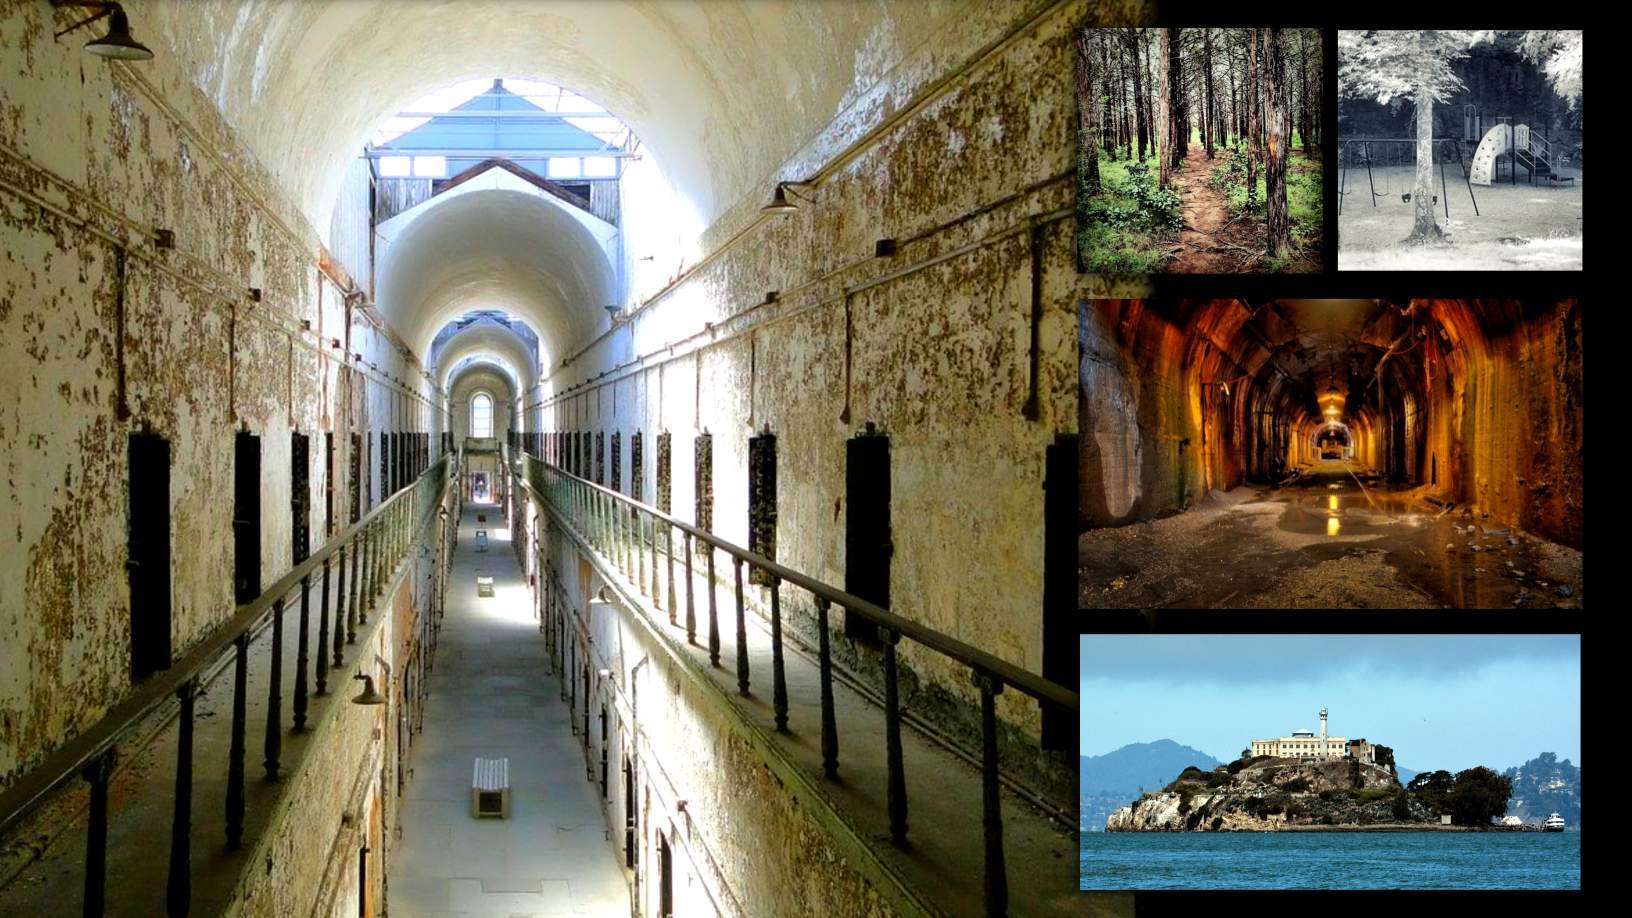 America's 13 most haunted places 2